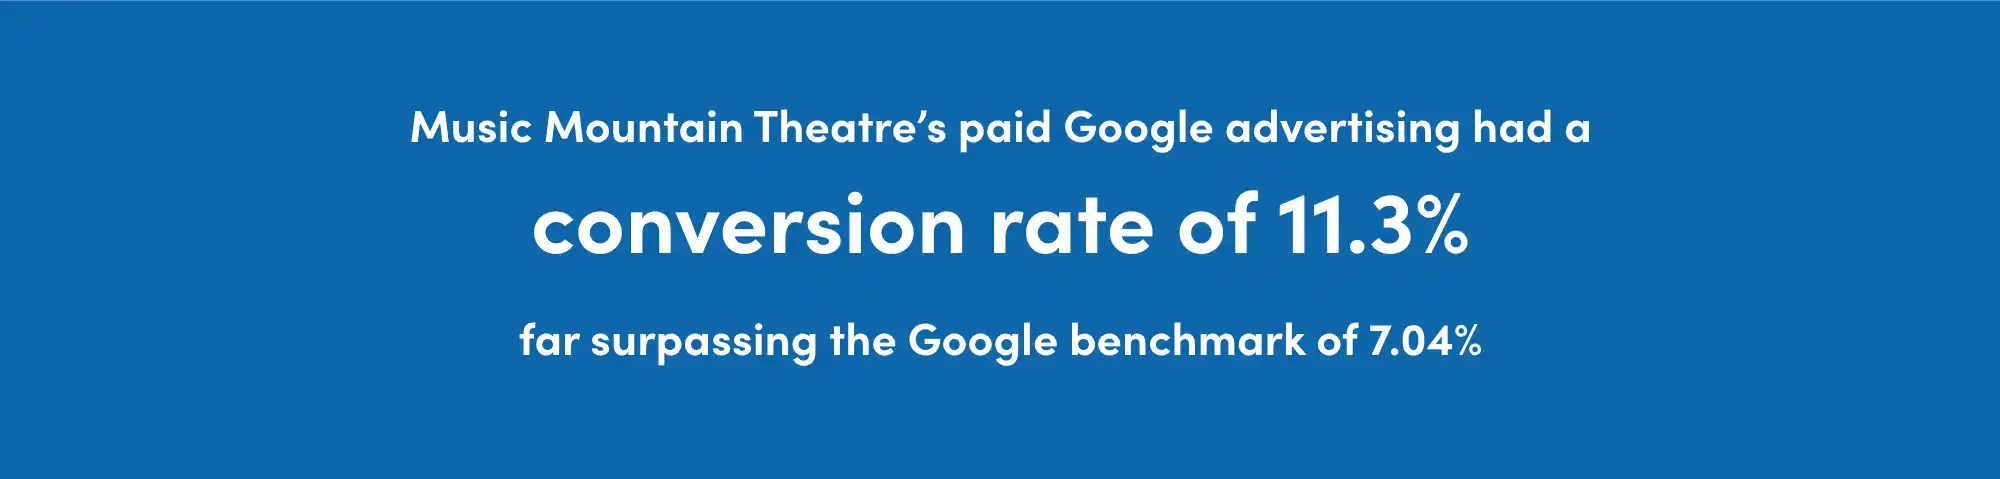 Music Mountain Theatre’s paid Google advertising had a conversion rate of 11.3% far surpassing the Google benchmark of 7.04%.